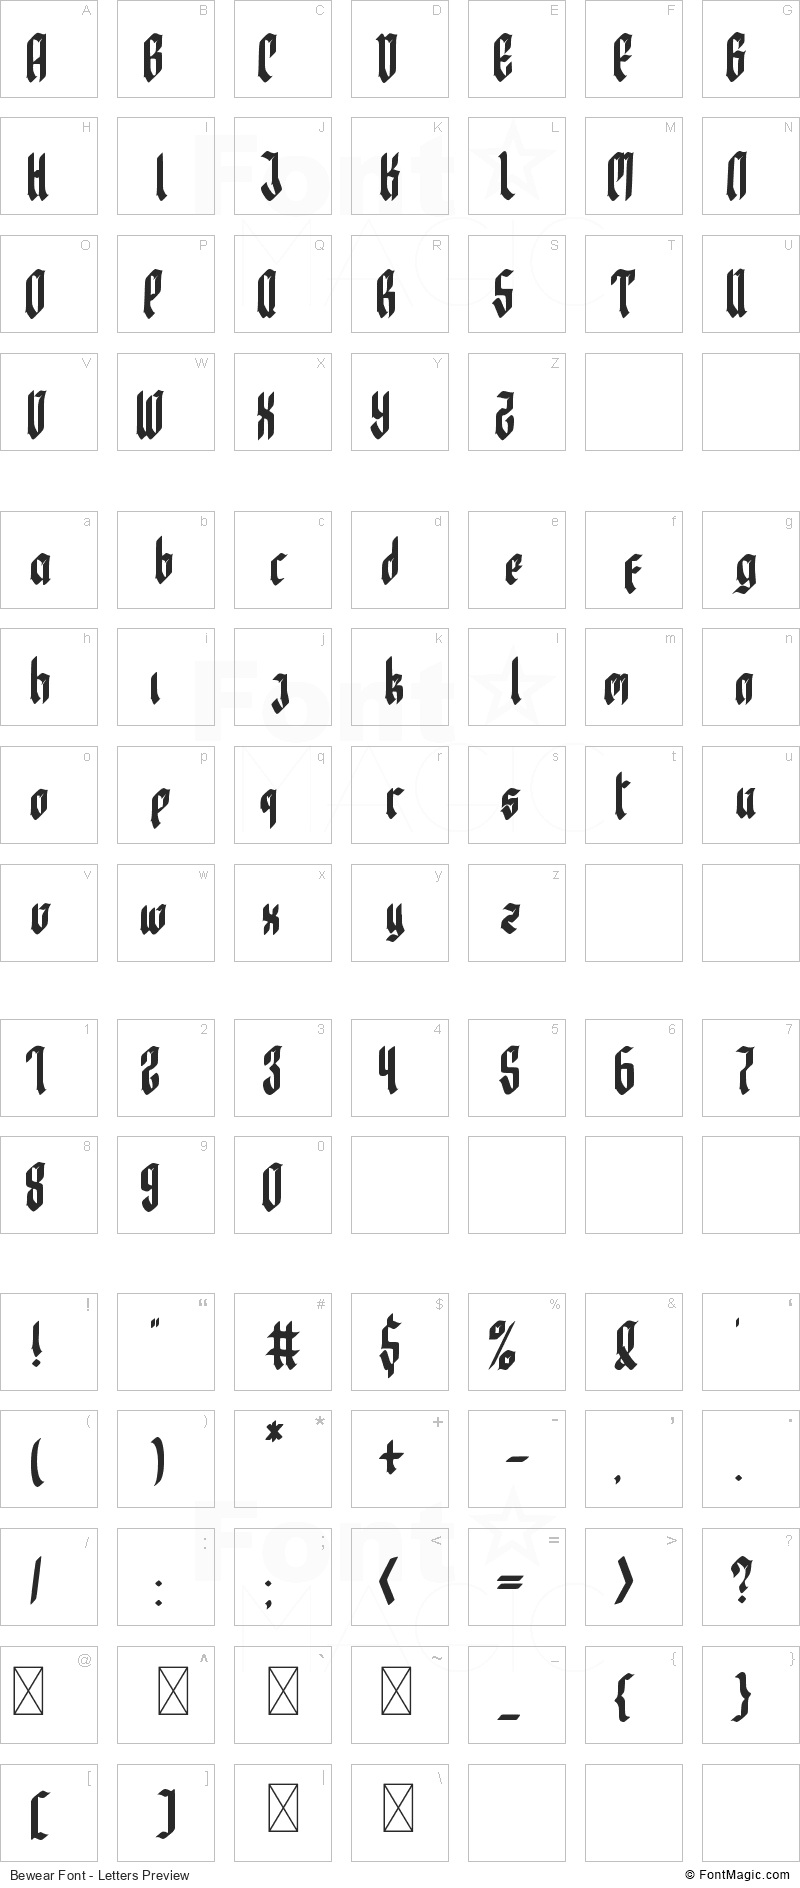 Bewear Font - All Latters Preview Chart